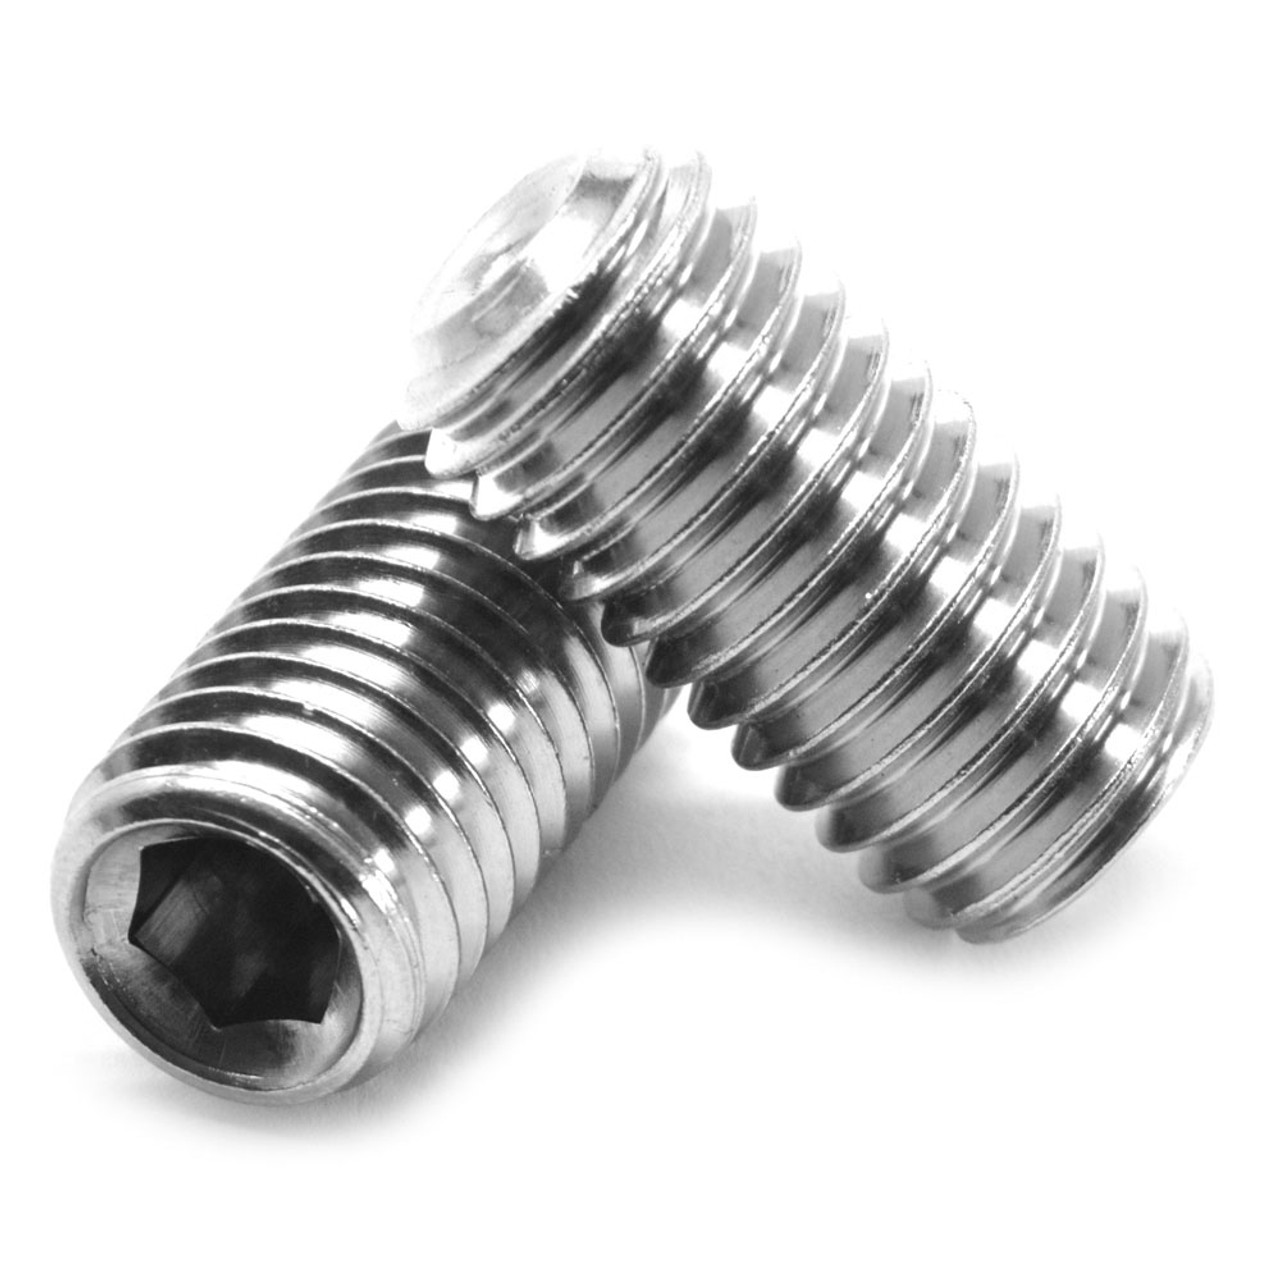 M6 x 1.00 x 25 MM Coarse Thread DIN 916 / ISO 4029 Socket Set Screw Cup Point Stainless Steel 316